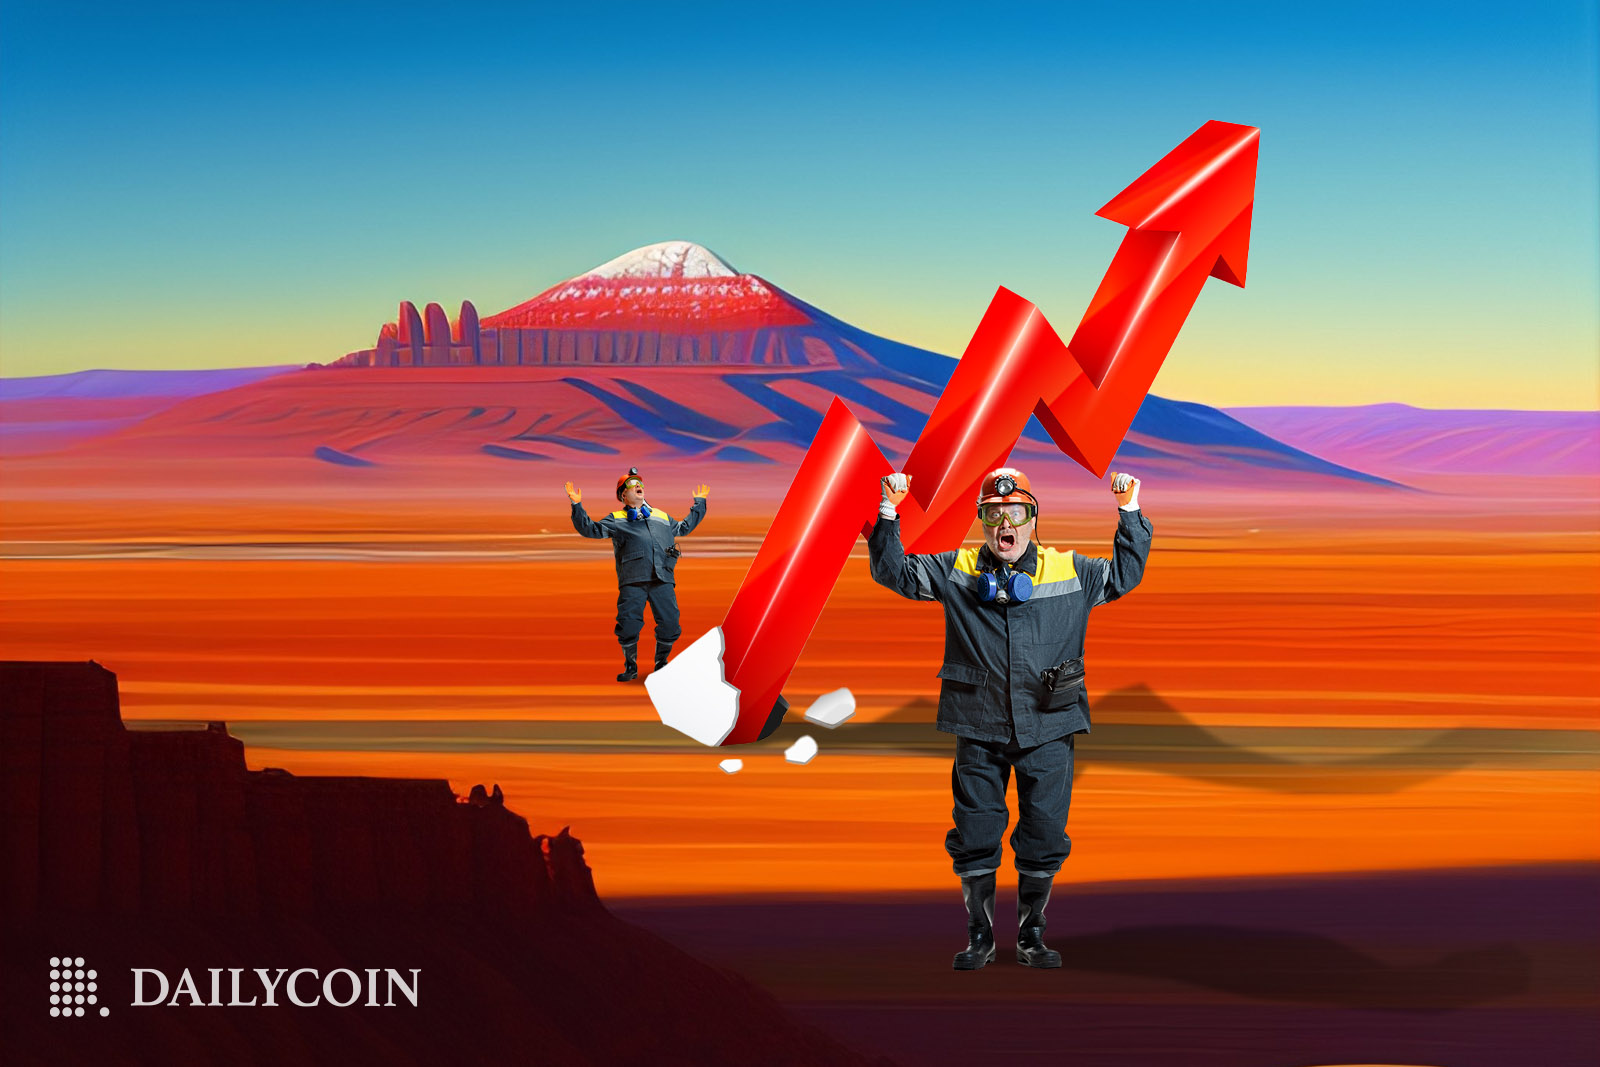 Crypto miner at the desert holding a red arrow pointing upwards